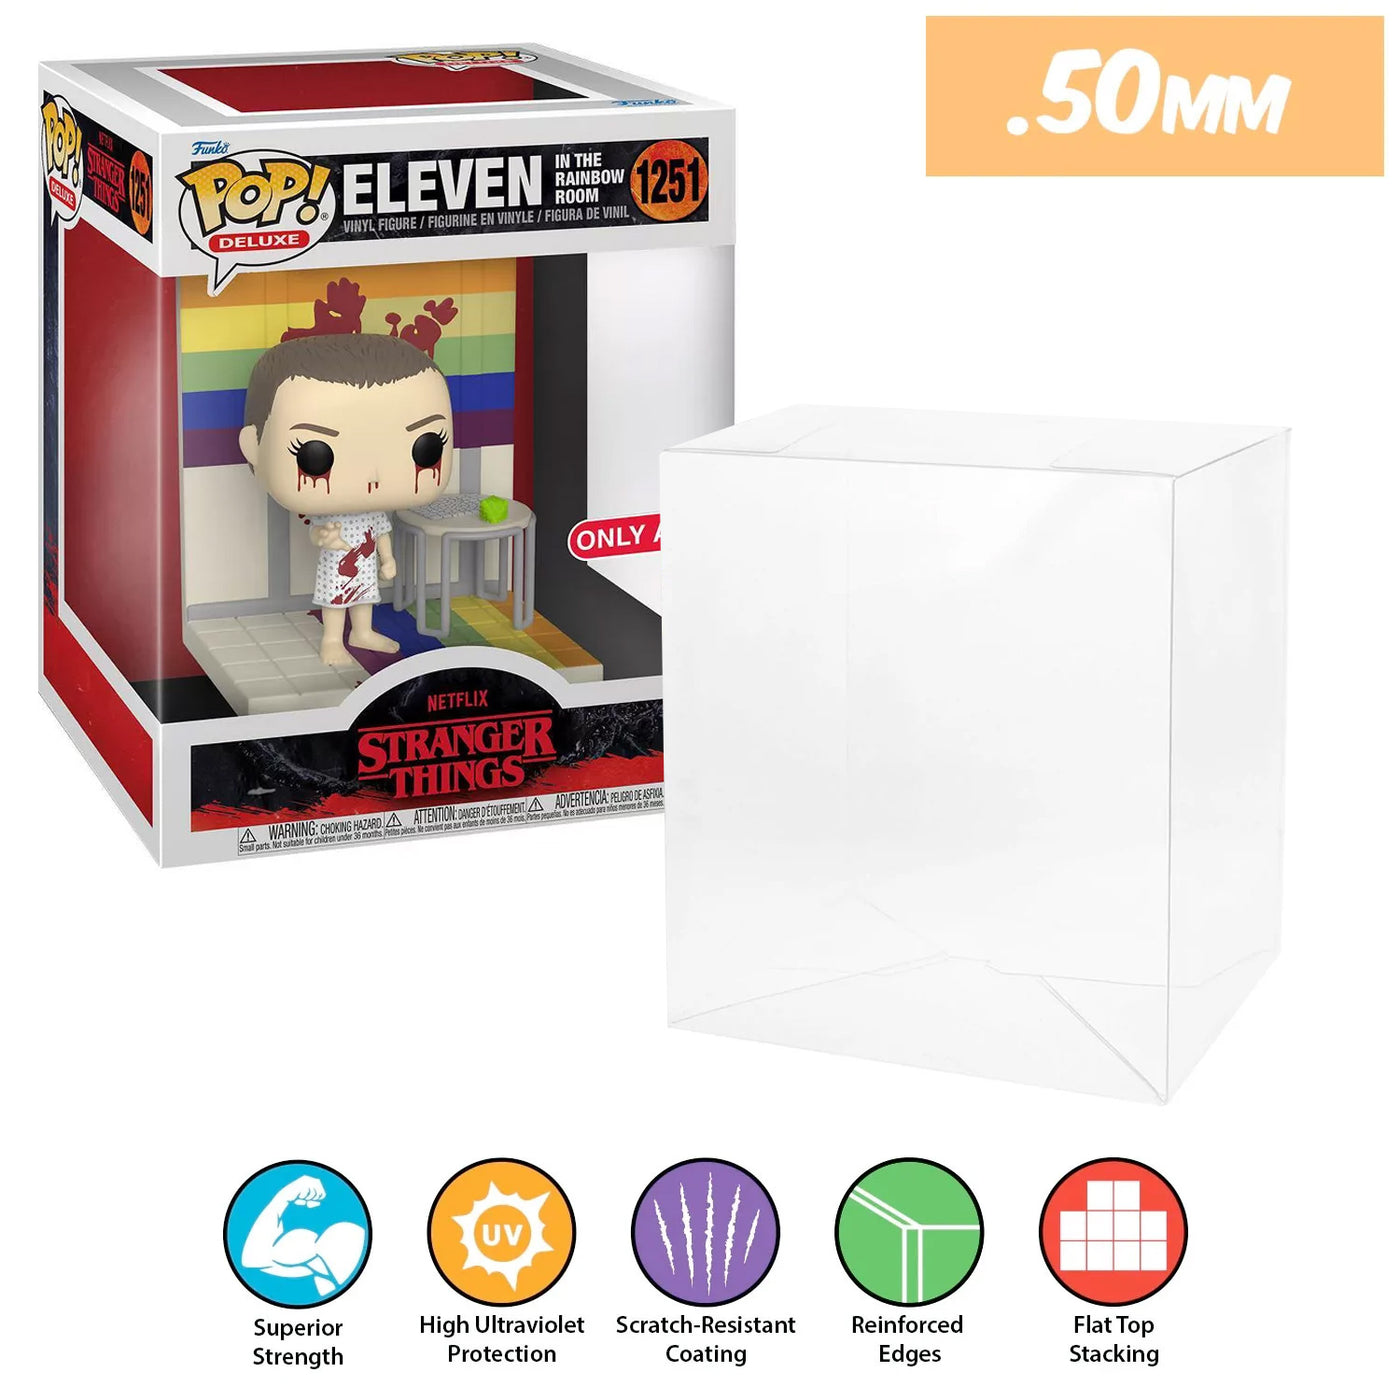 1251 pop deluxe eleven in the rainbow room best funko pop protectors thick strong uv scratch flat top stack vinyl display geek plastic shield vaulted eco armor fits collect protect display case kollector protector